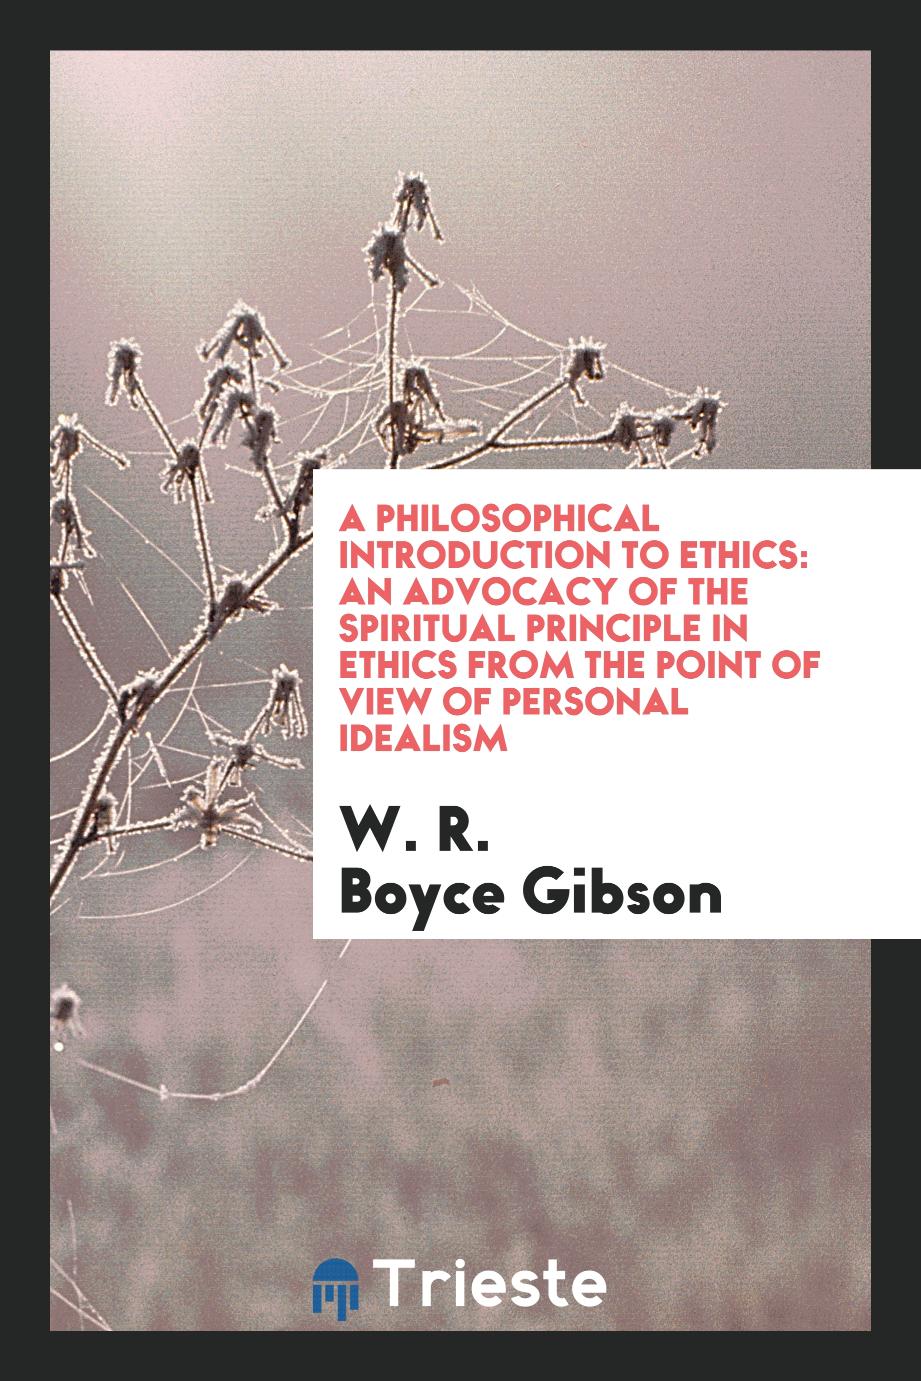 A philosophical introduction to ethics: an advocacy of the spiritual principle in ethics from the point of view of personal idealism